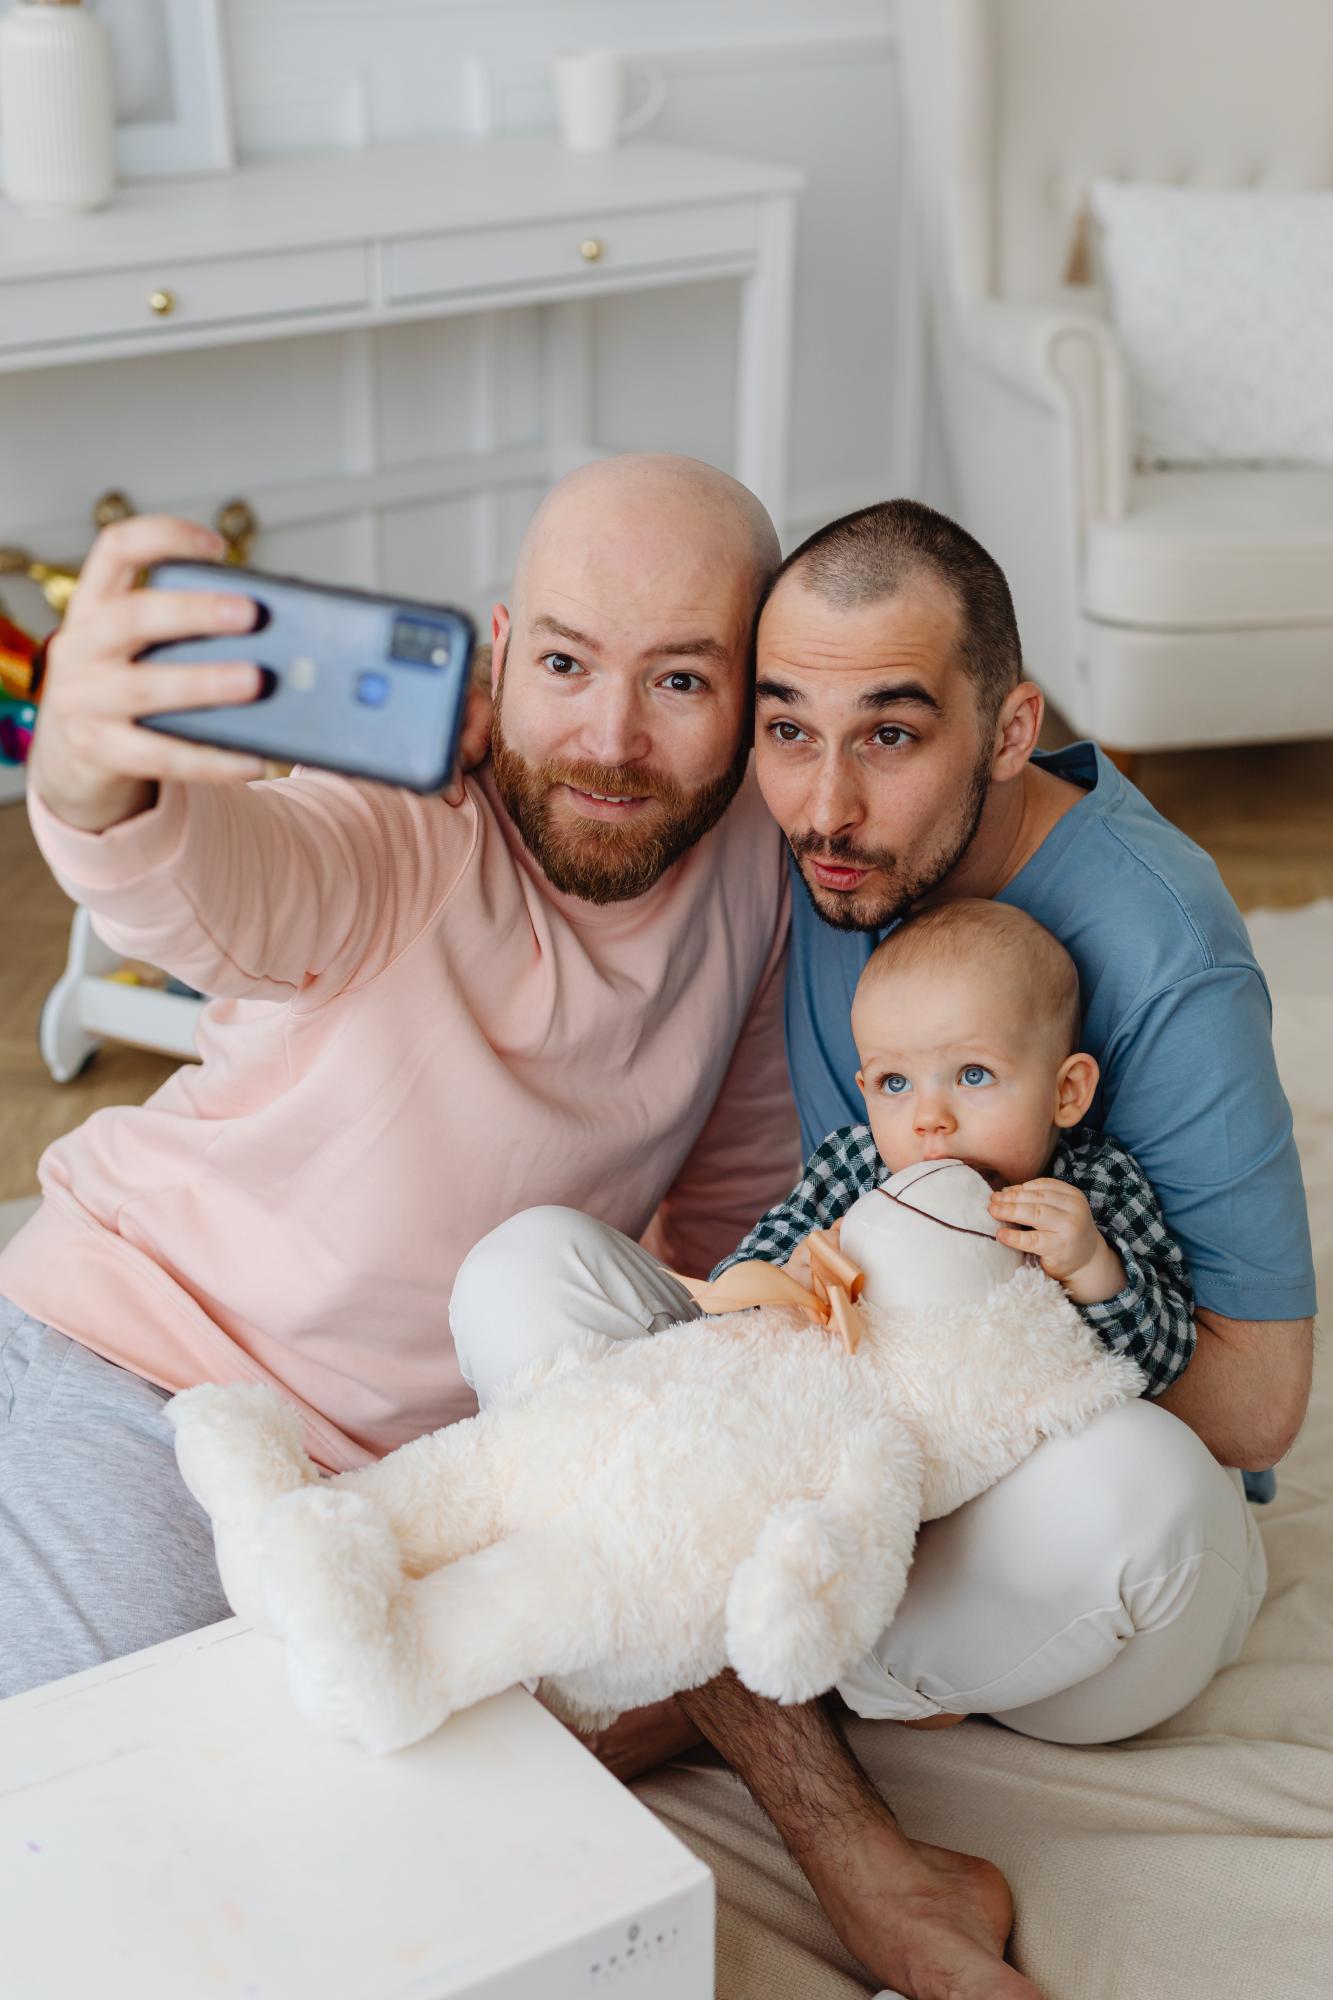 Sam and Ali taking a selfie with their child